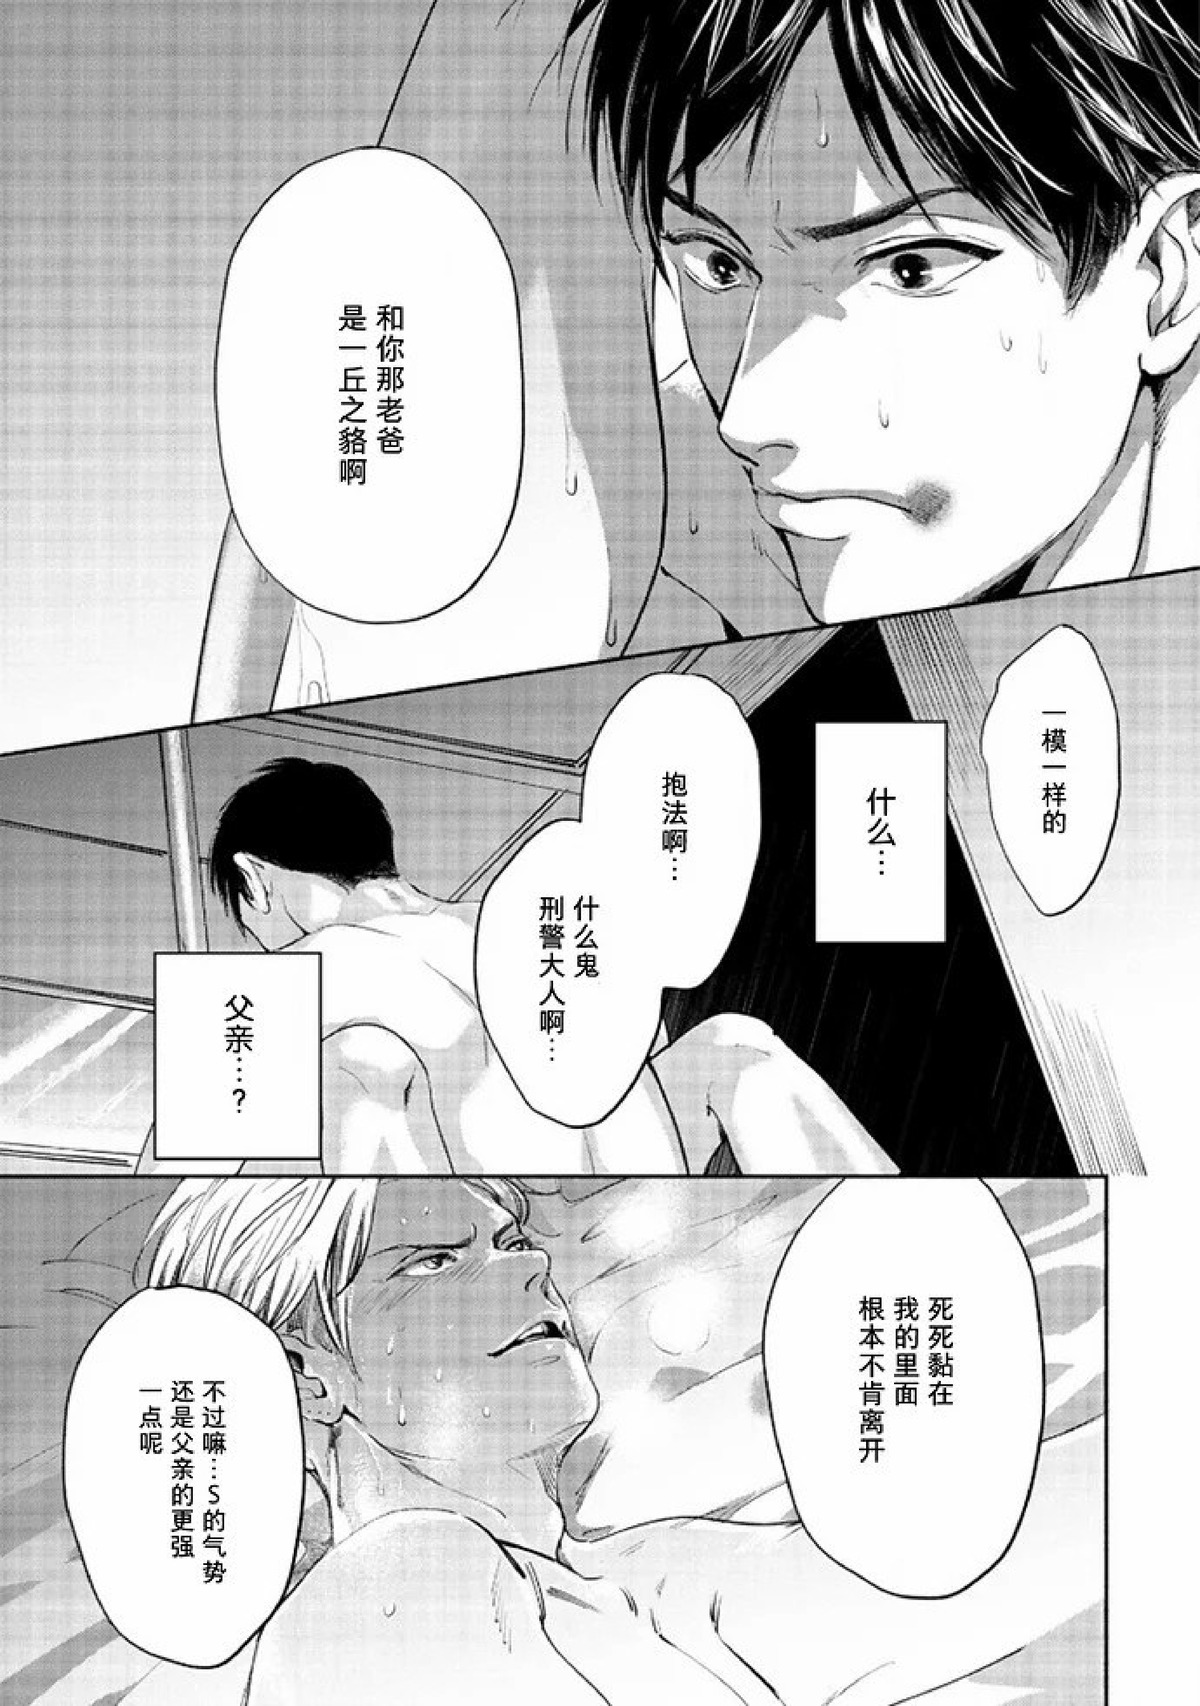 【Two sides of the same coin[腐漫]】漫画-（上卷01-02）章节漫画下拉式图片-101.jpg